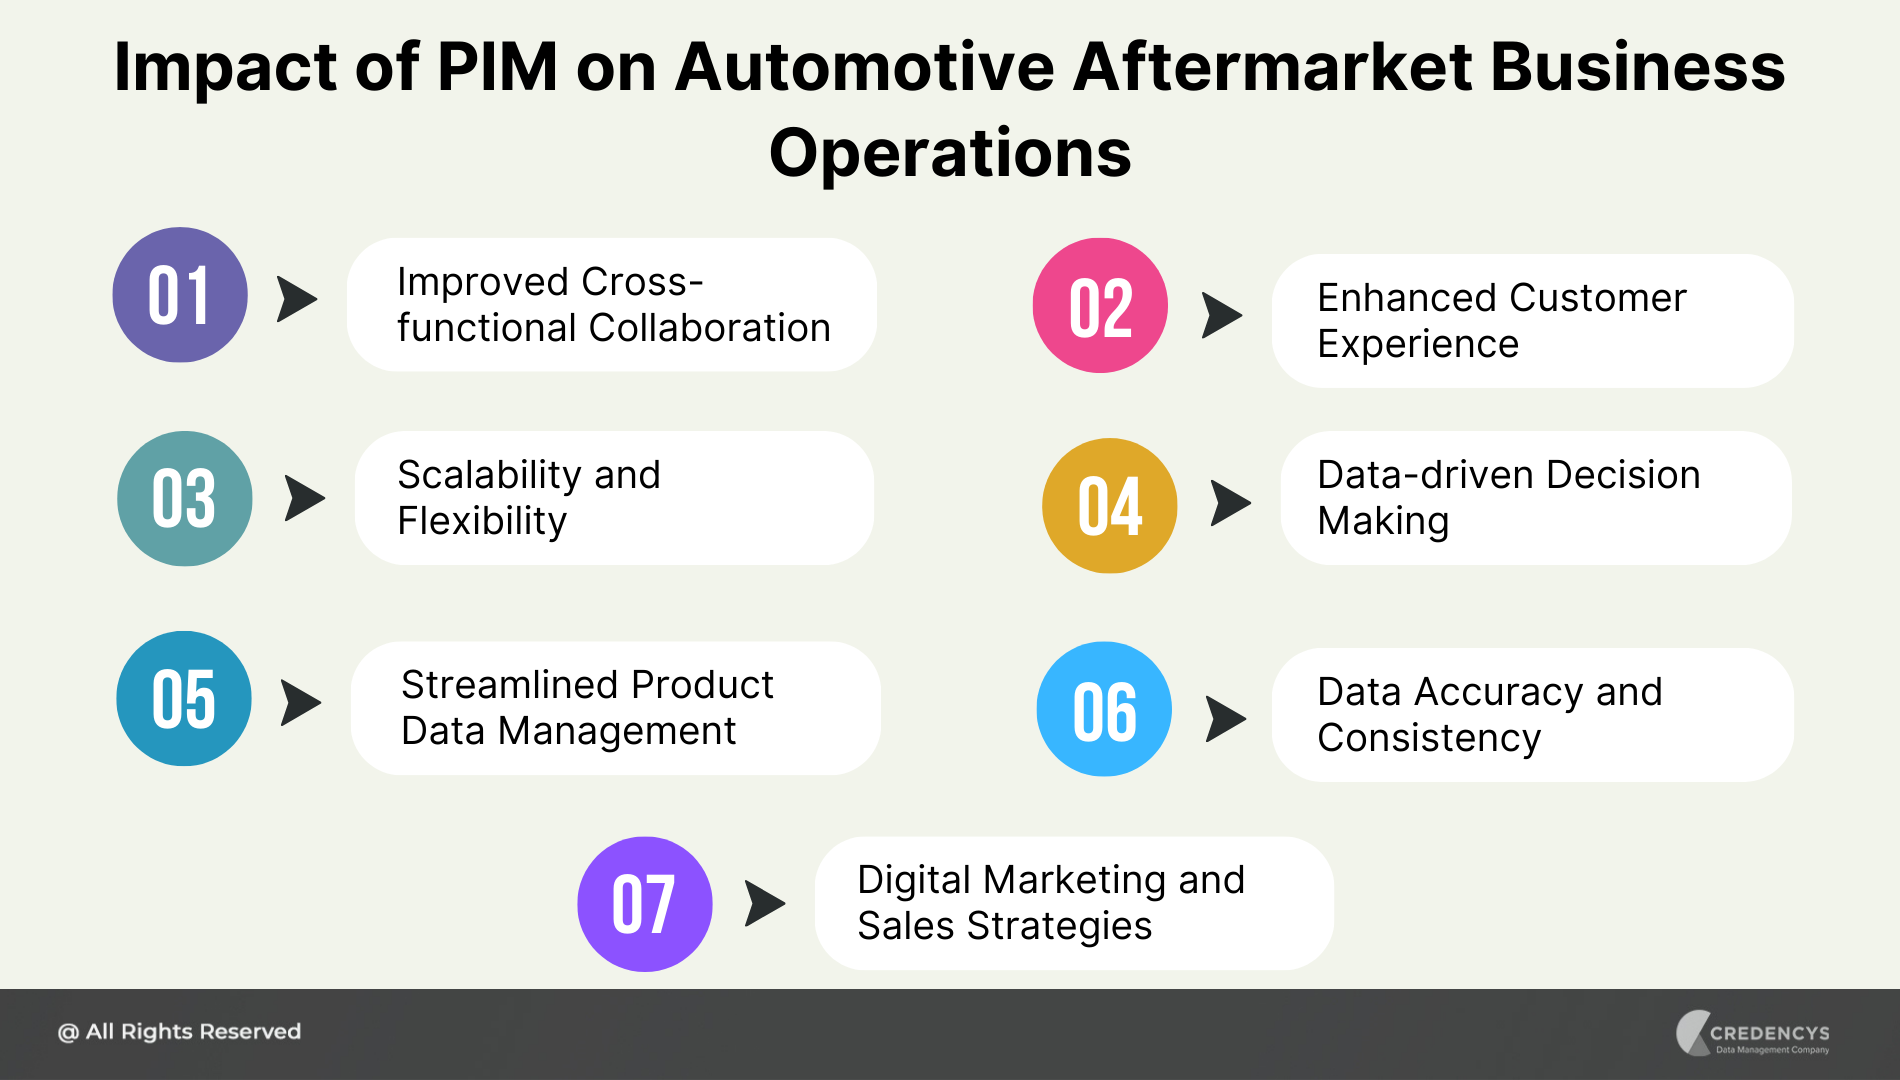 Impact of PIM on Automotive Aftermarket Business Operations